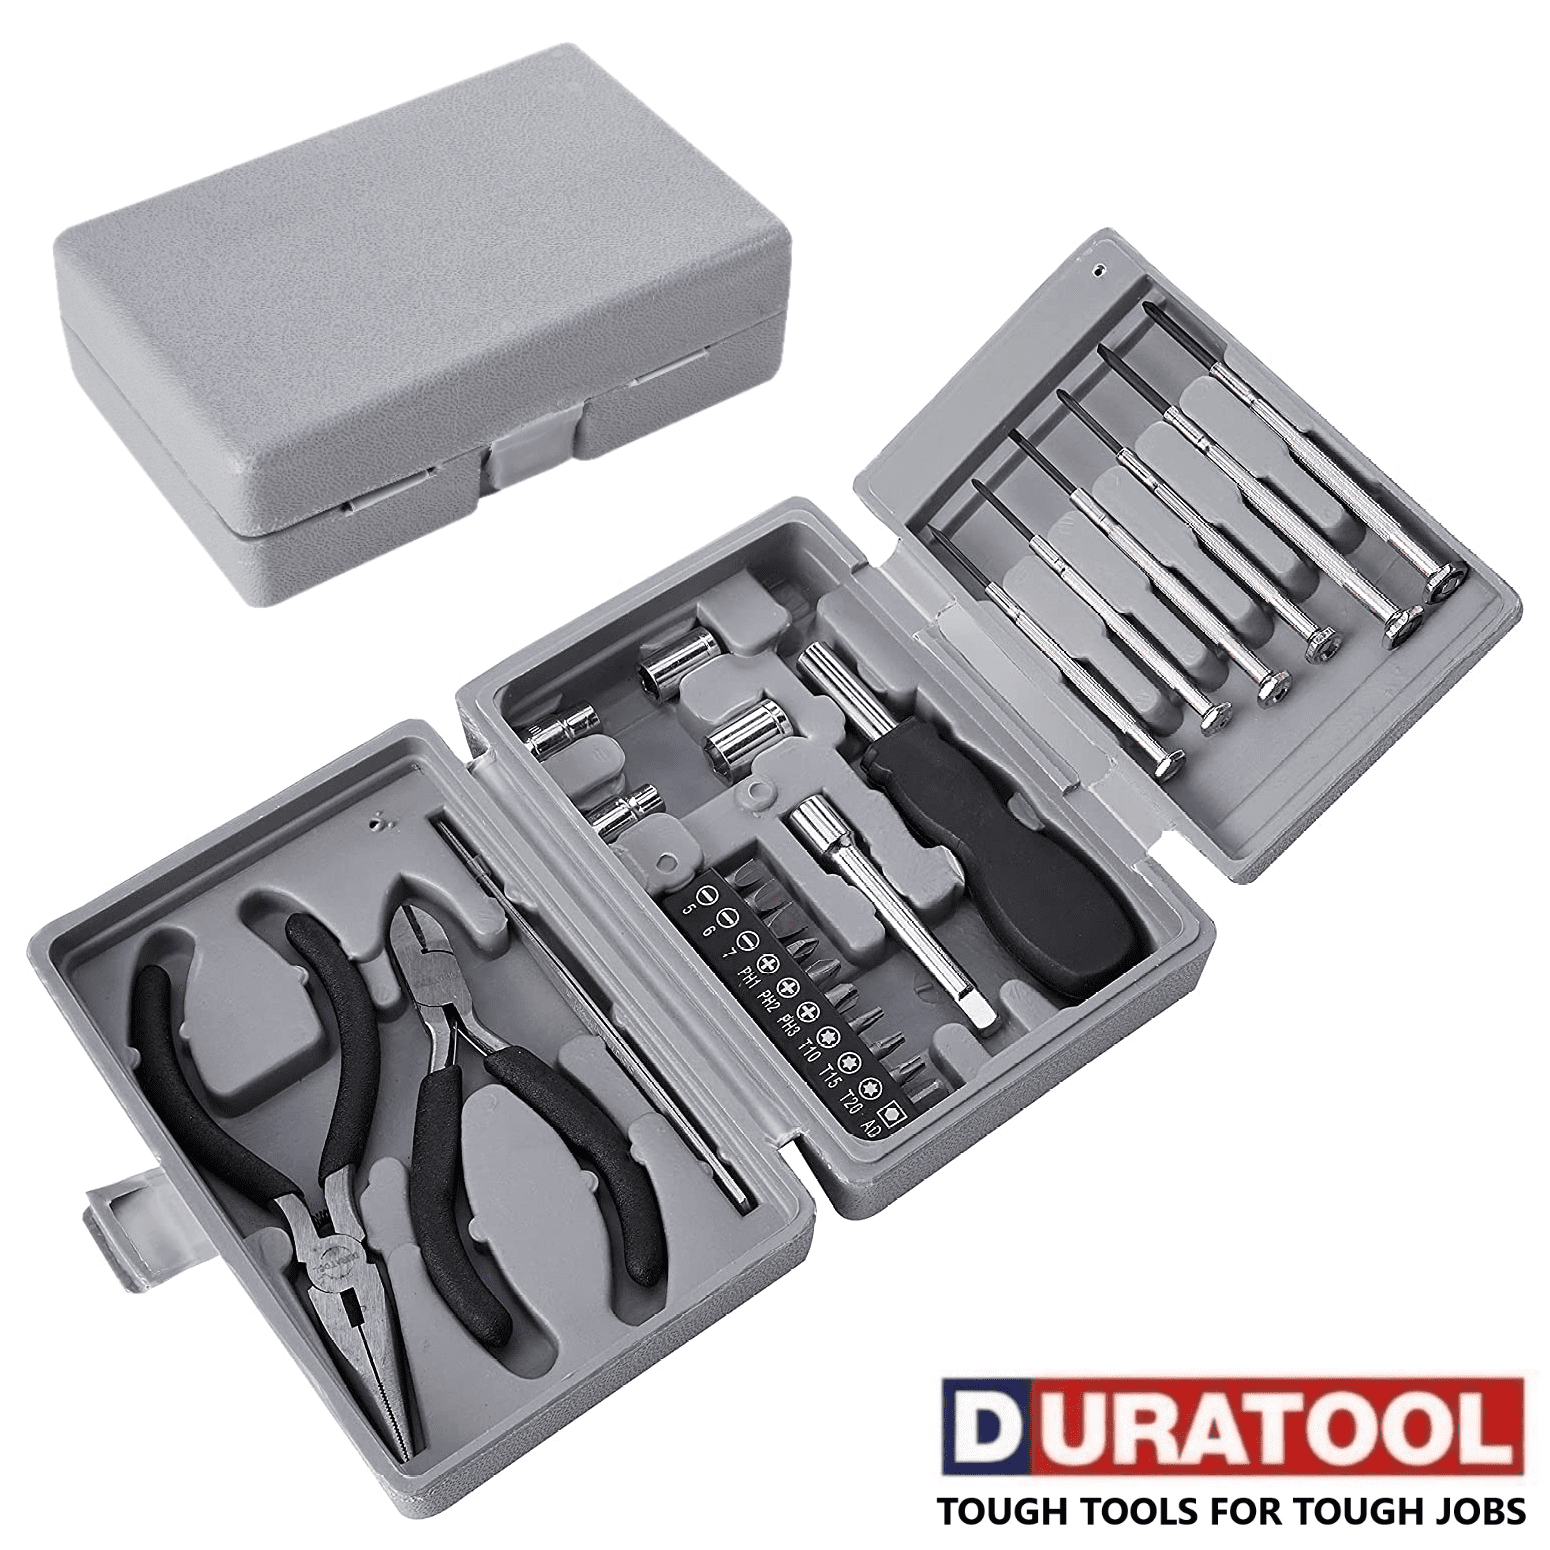 DURATOOL 25-Piece Mini Tool Kit Set for Home, Office, Dorm, and Basic  Repairs - Portable Small Tool Kit with Case for Travel 